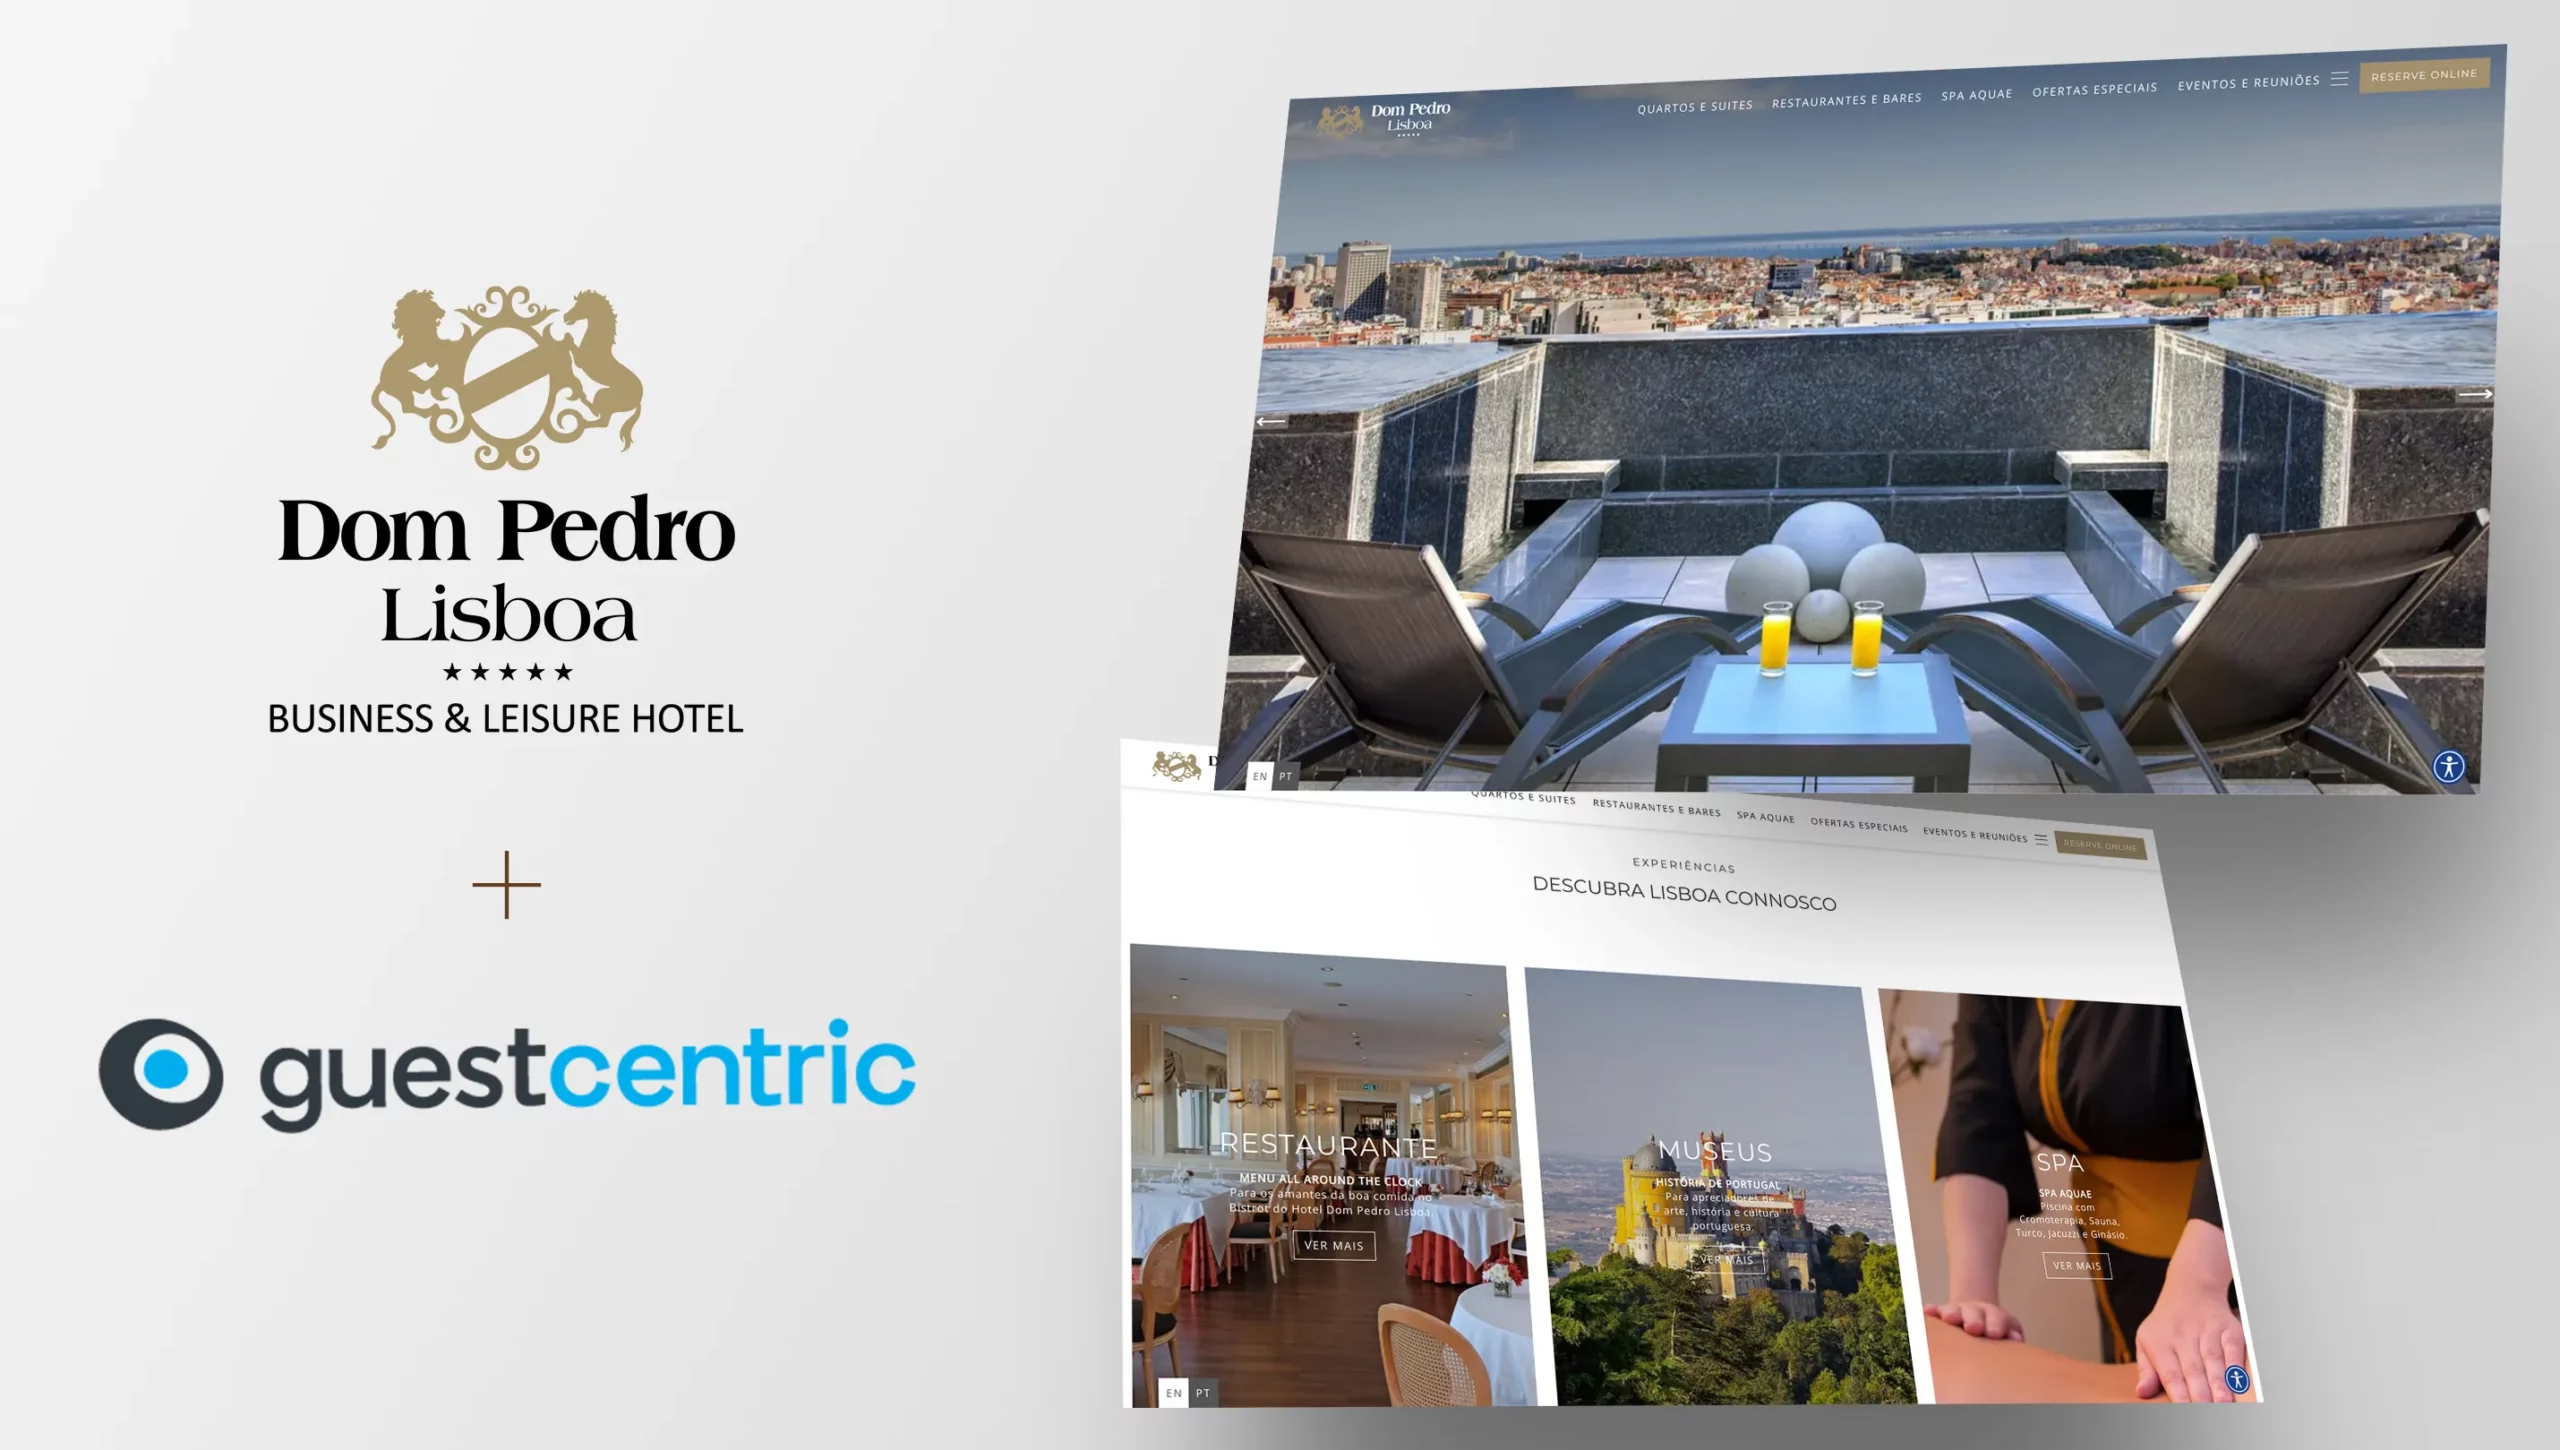 Guestcentric partners with Dom Pedro Lisboa